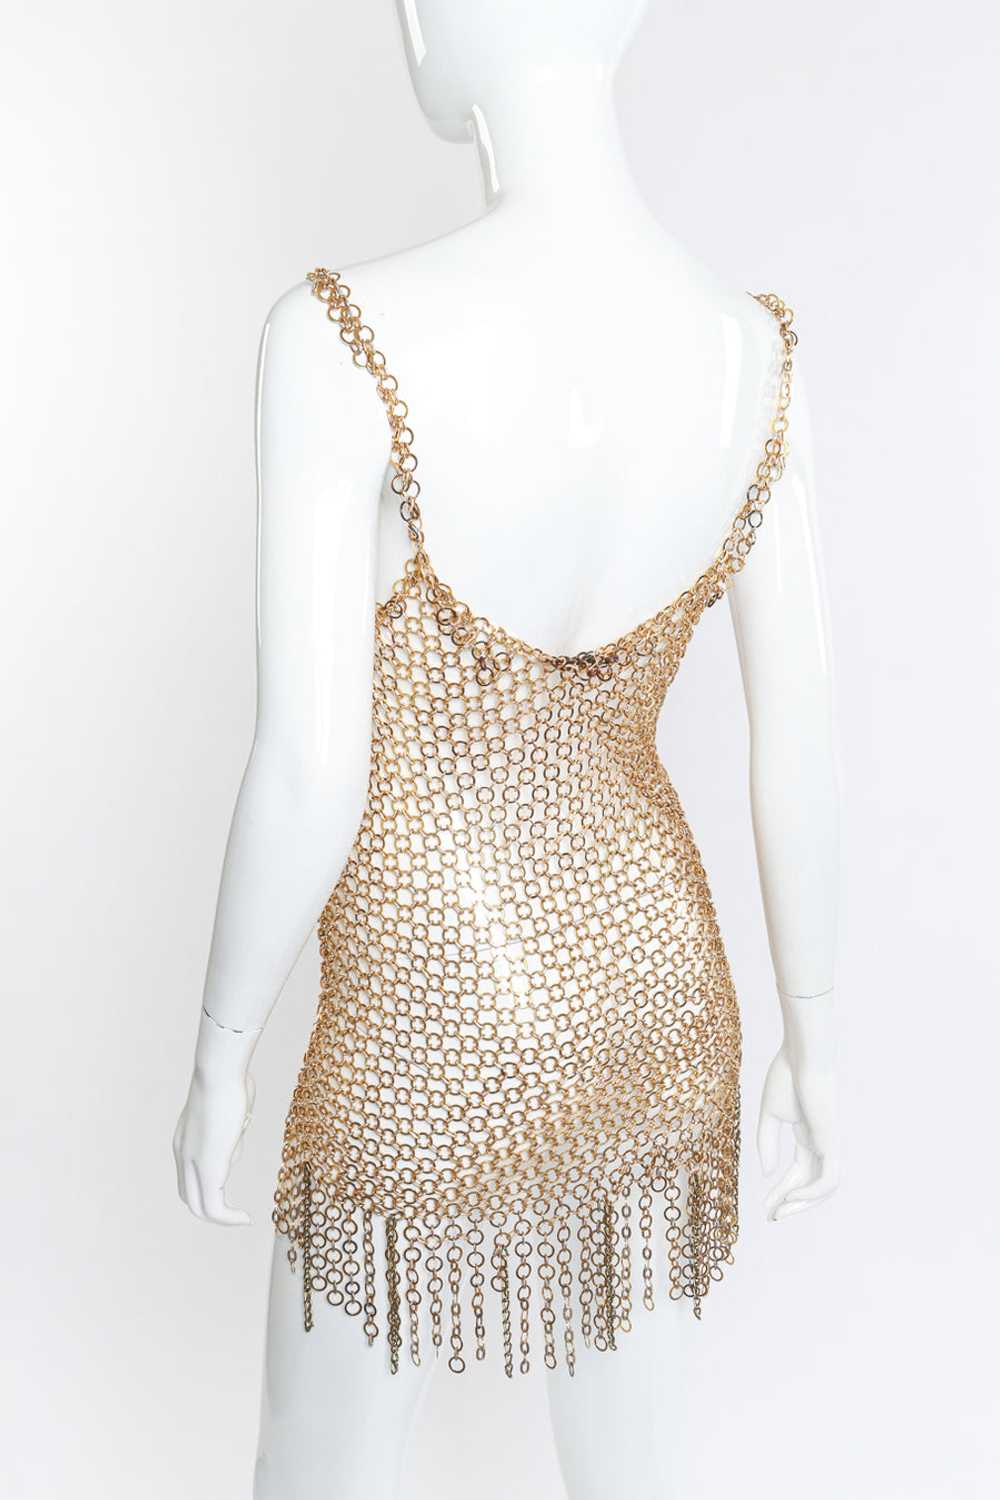 Ring Link Chain Dress - image 5